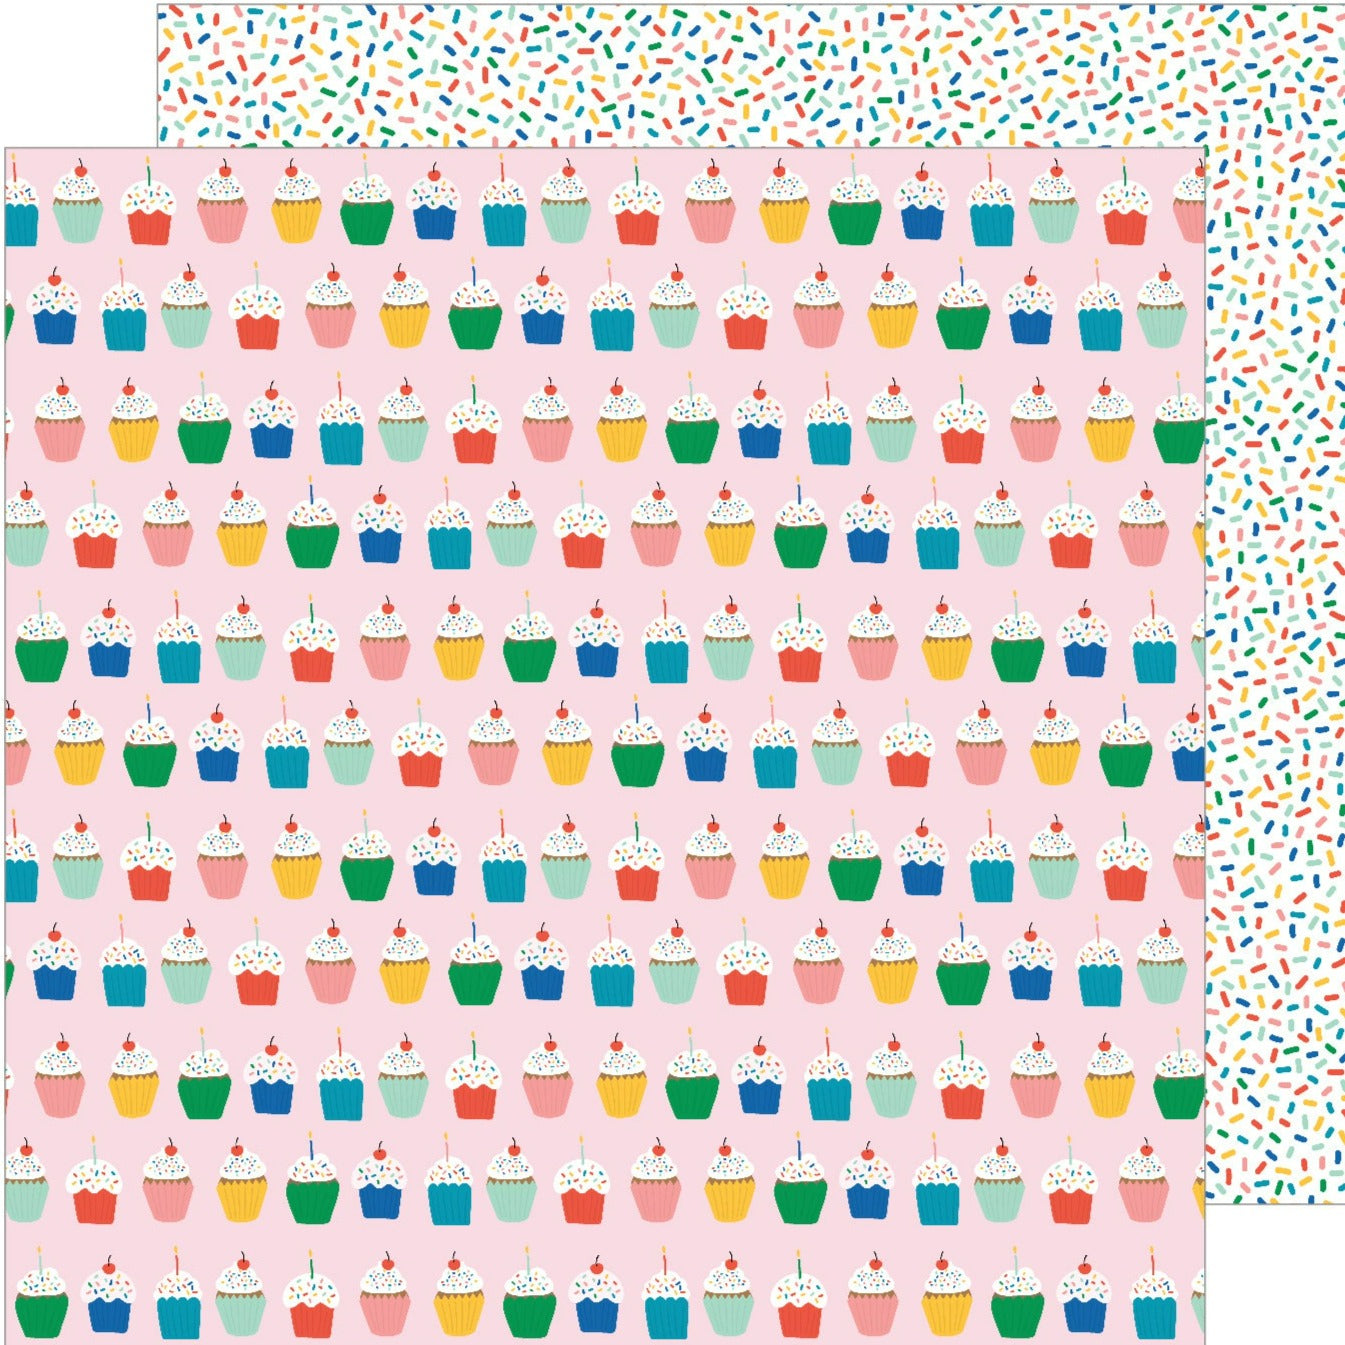 12x12 double-sided patterned cardstock - (Side A - rows of cupcakes in a rainbow of colors on a pink background, Side B - confetti in a rainbow of colors on a white background) - Pebbles